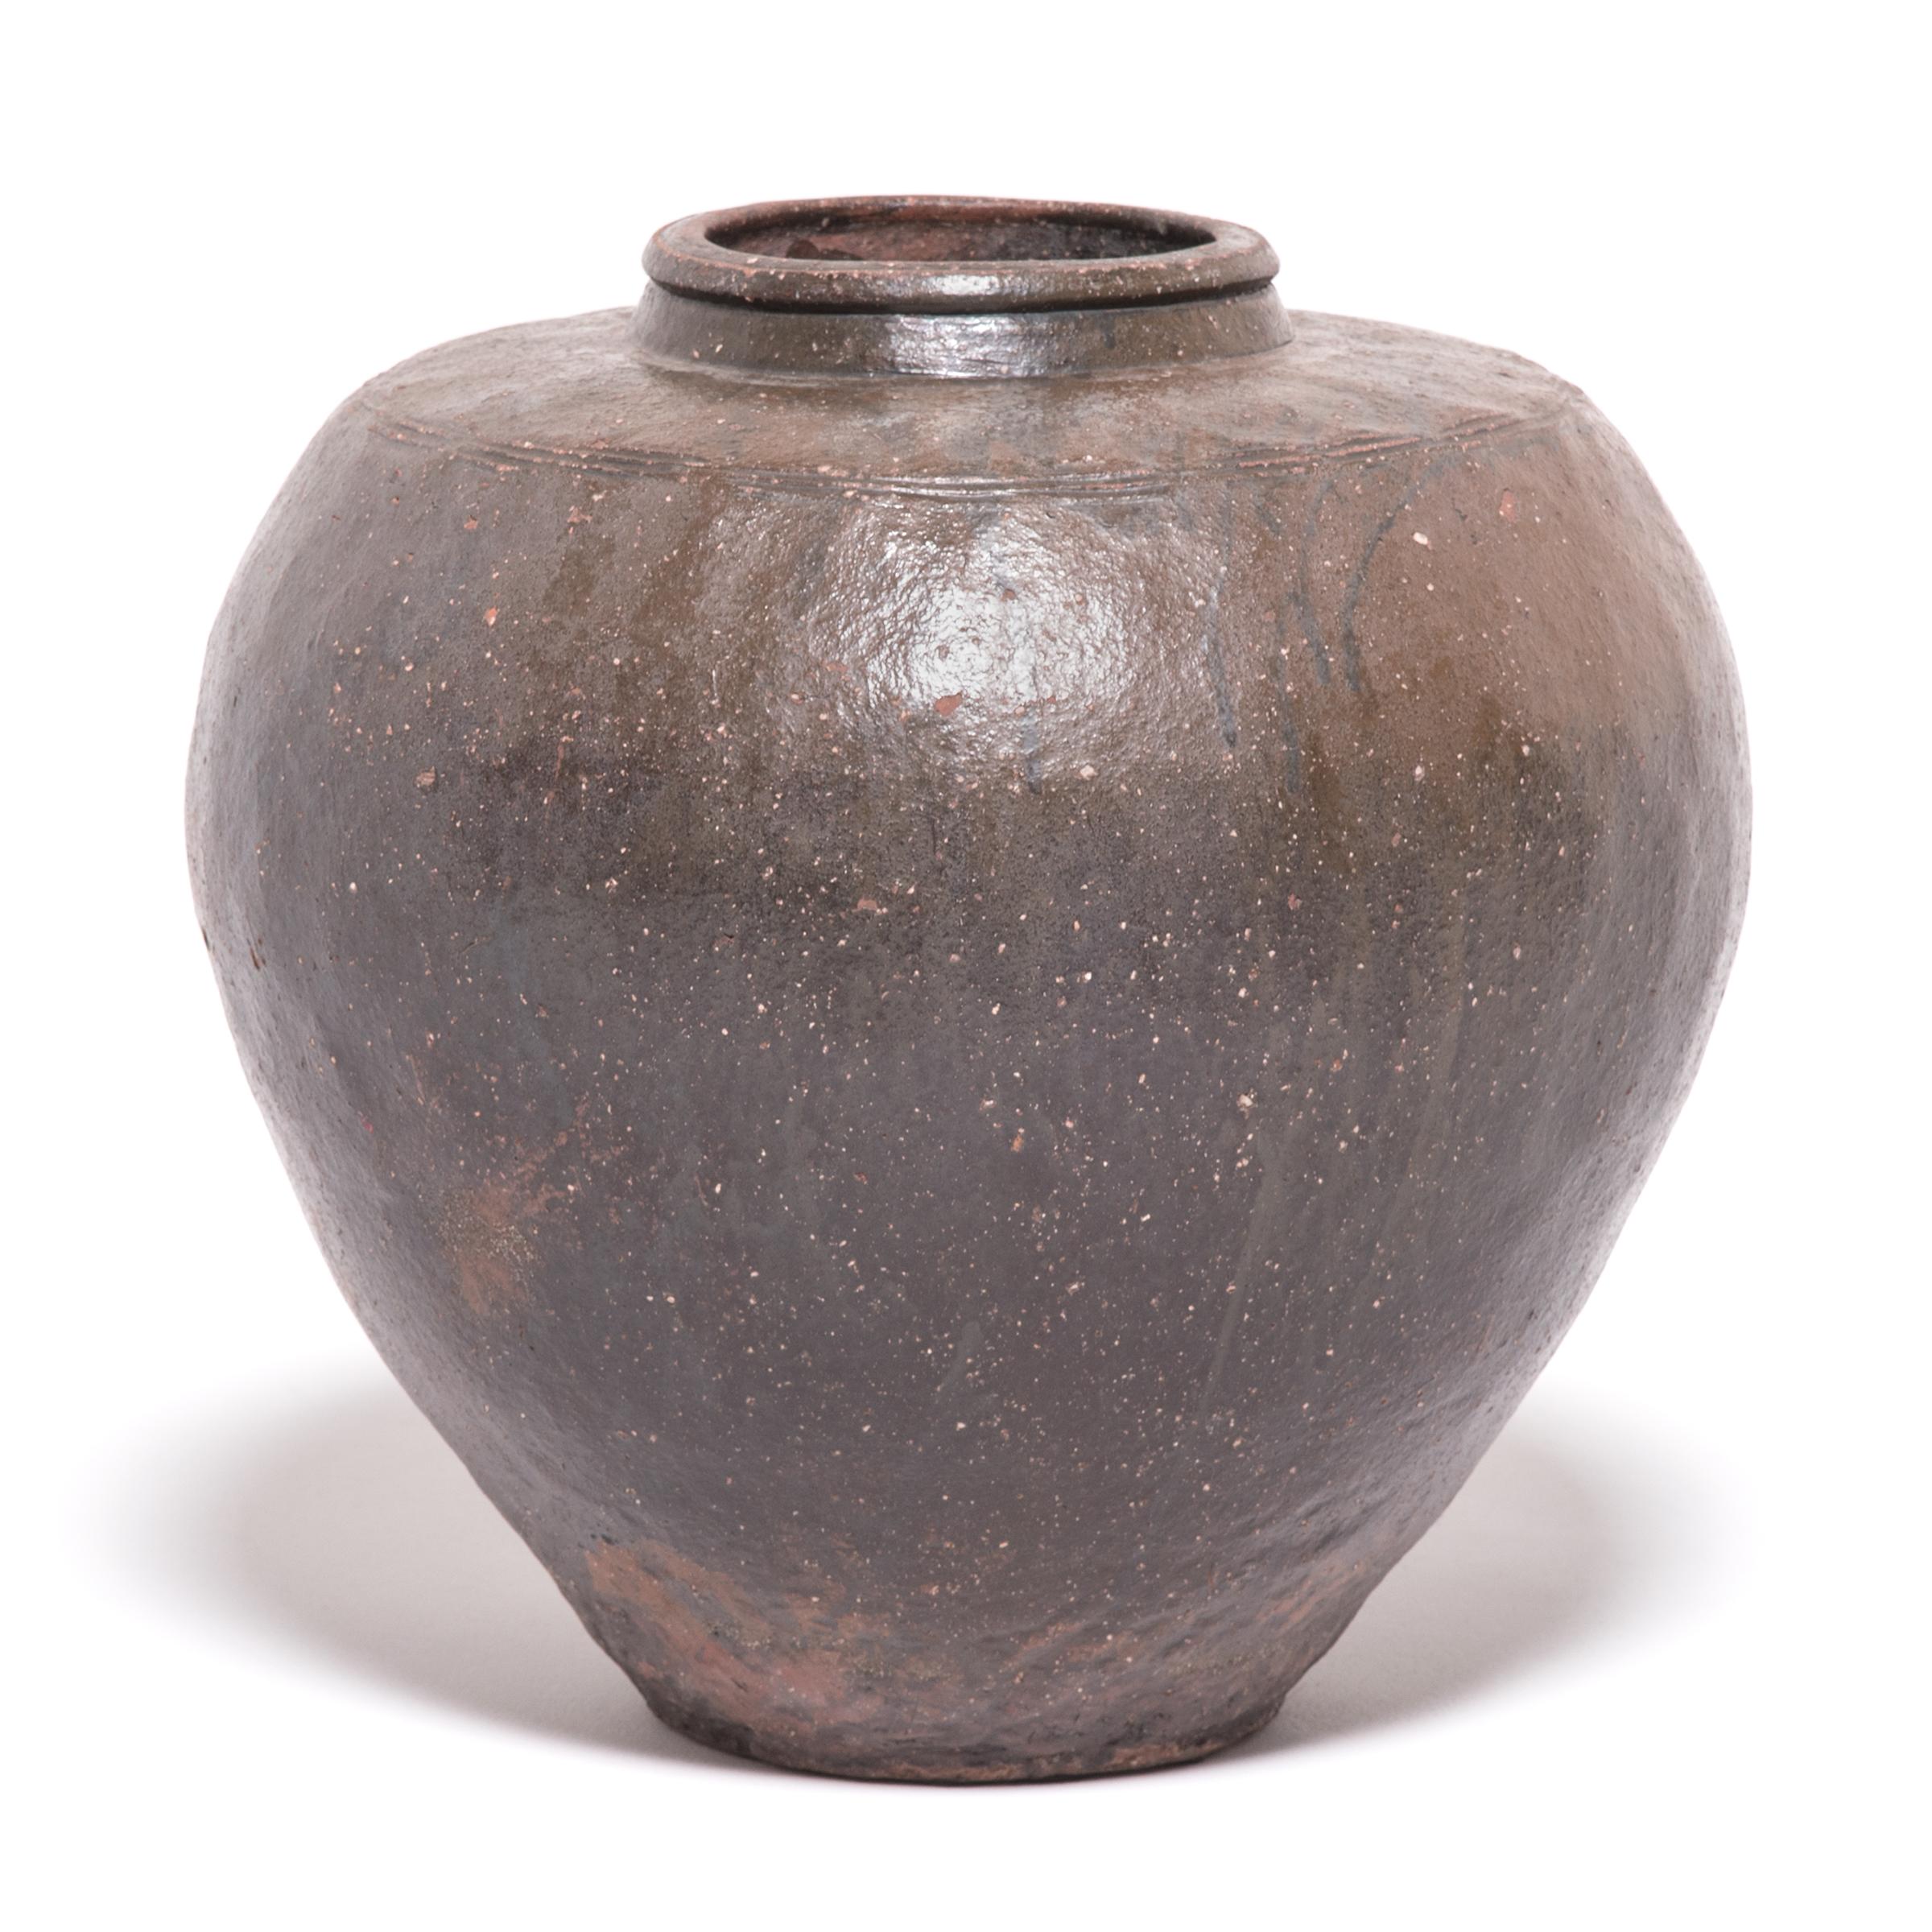 The shape of this handmade ceramic jar from Northern China dates back to the Bronze Age c. 3000 BC, when it was used to store wine and spirits made from rice and grains. It has wonderful organic color, form, and balance.

Additional